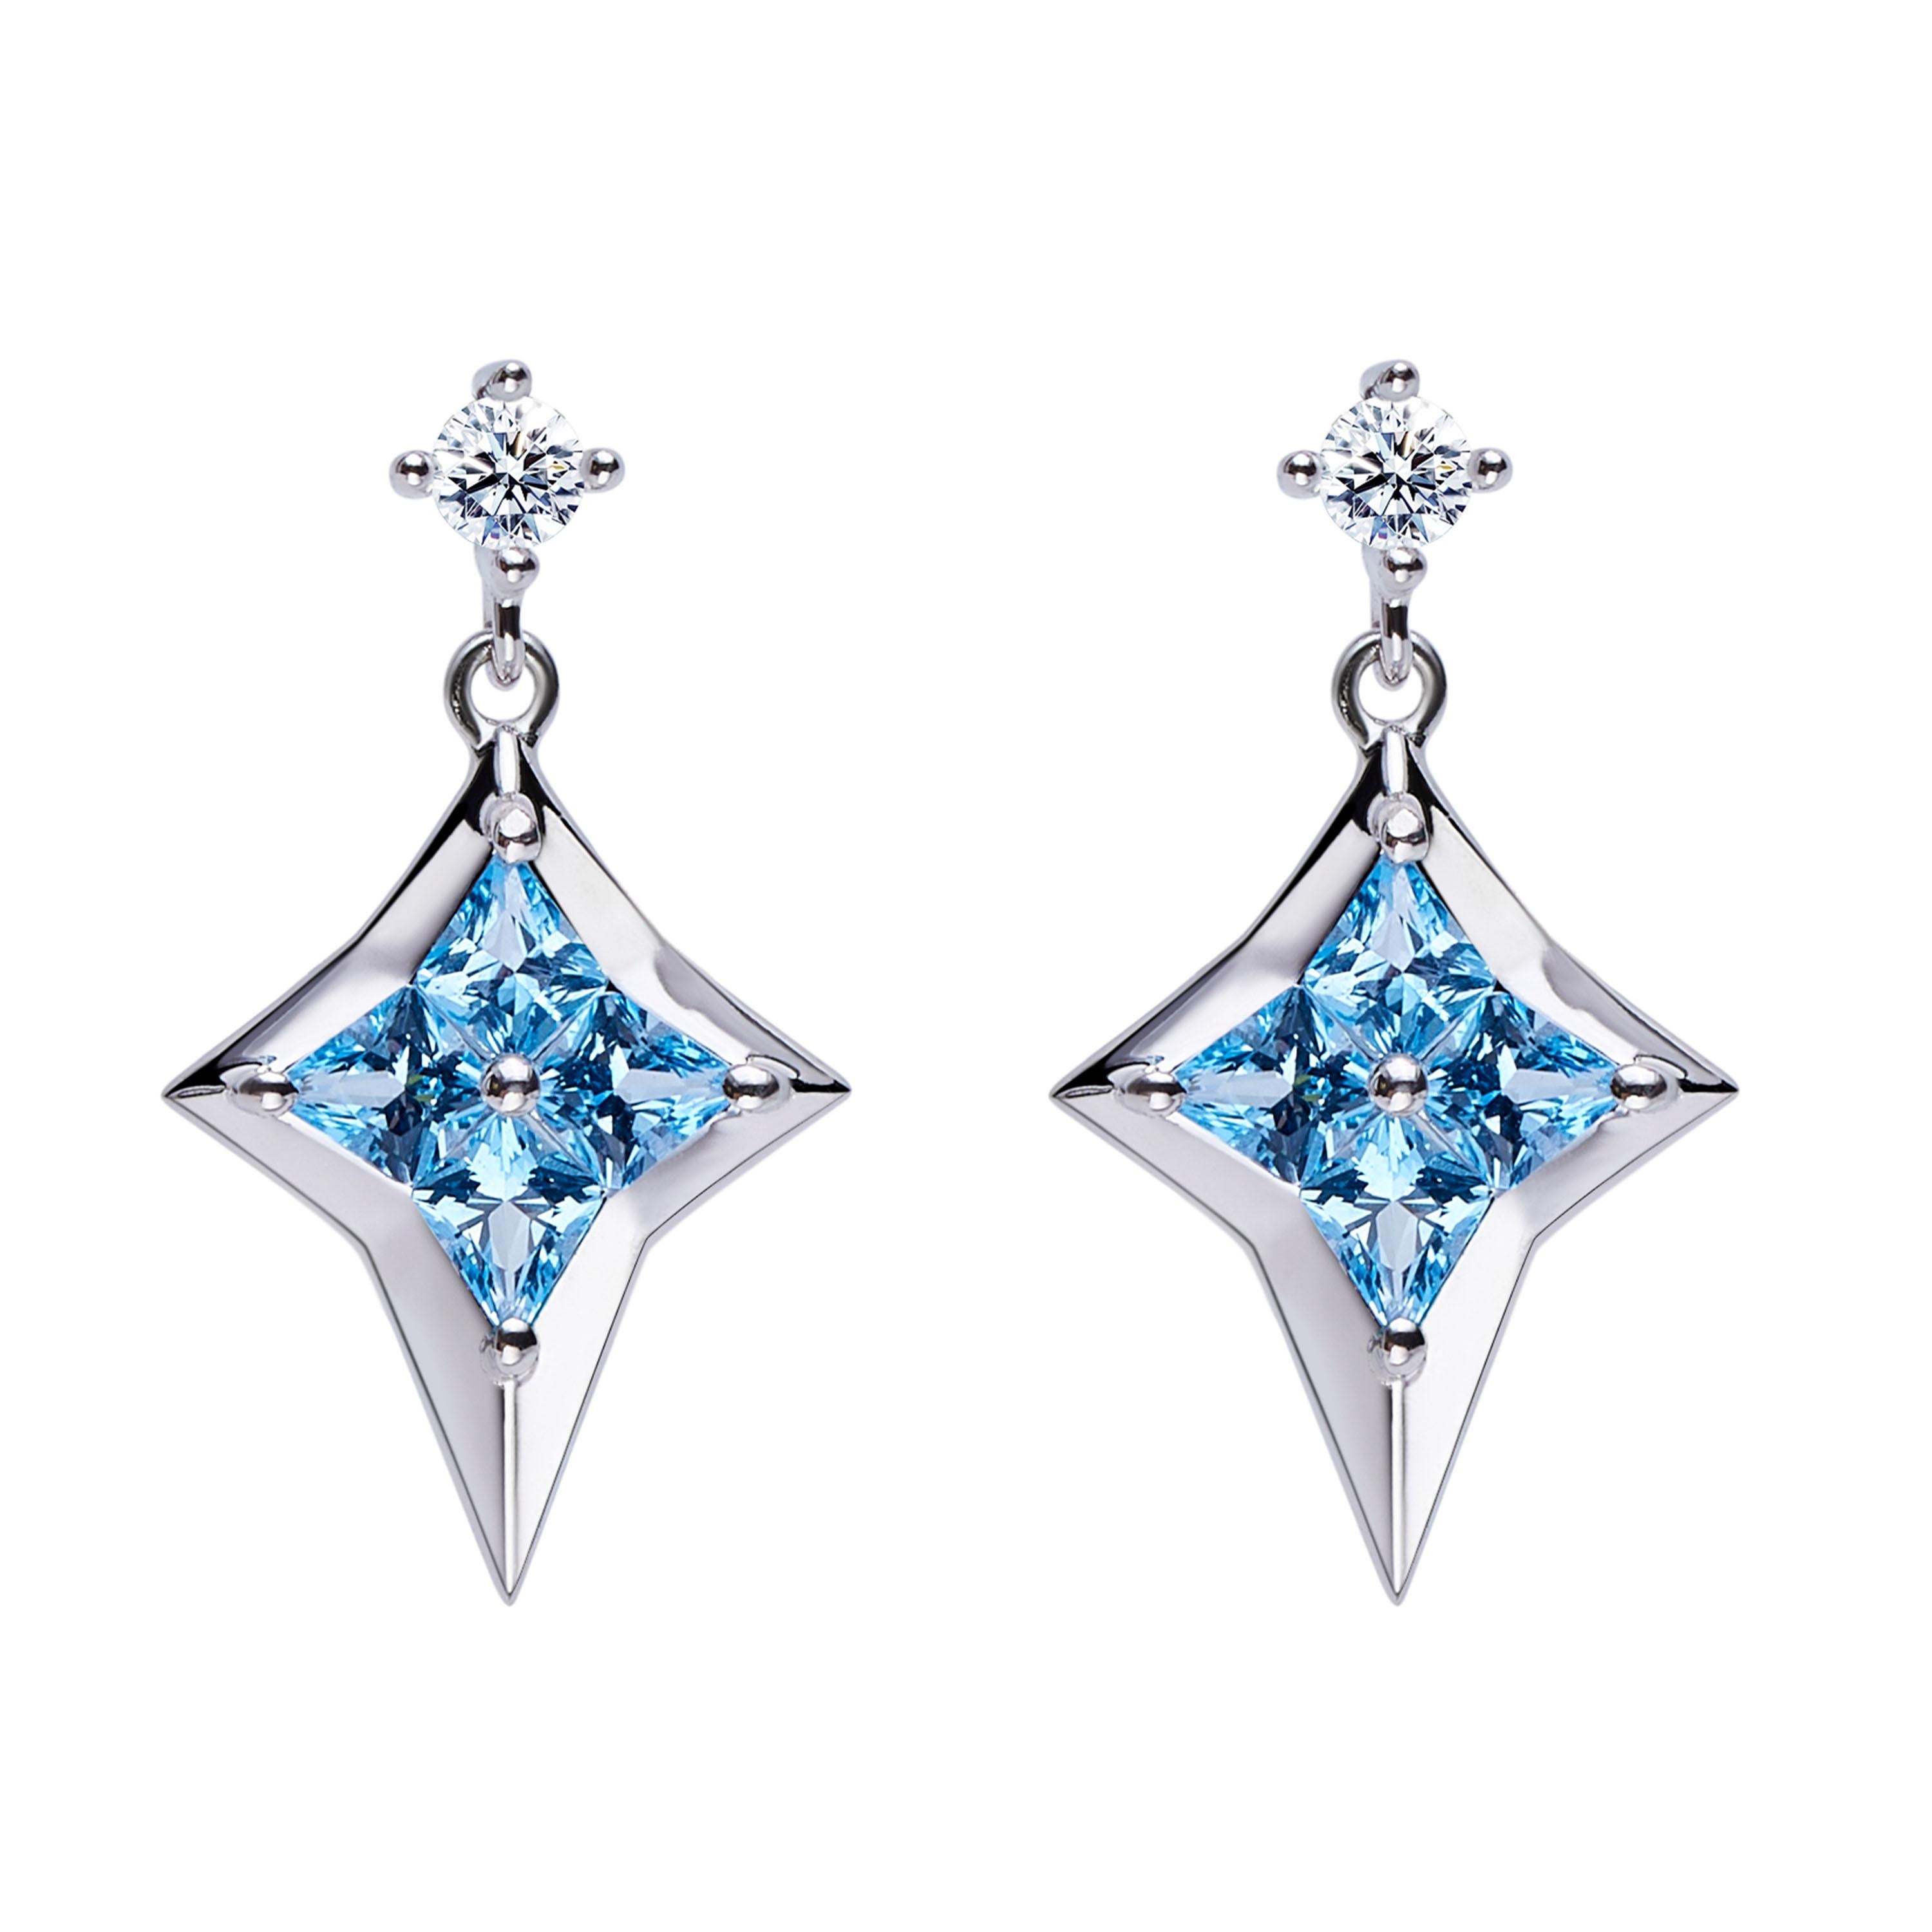 Description:
Star of Love North Star jewellery set with sky blue topazes totalling 0.9ct in weight, and white cubic zirconia, set in white rhodium plate on sterling silver.

Inspiration:
The Star of Love series is inspired by the Polaris – the